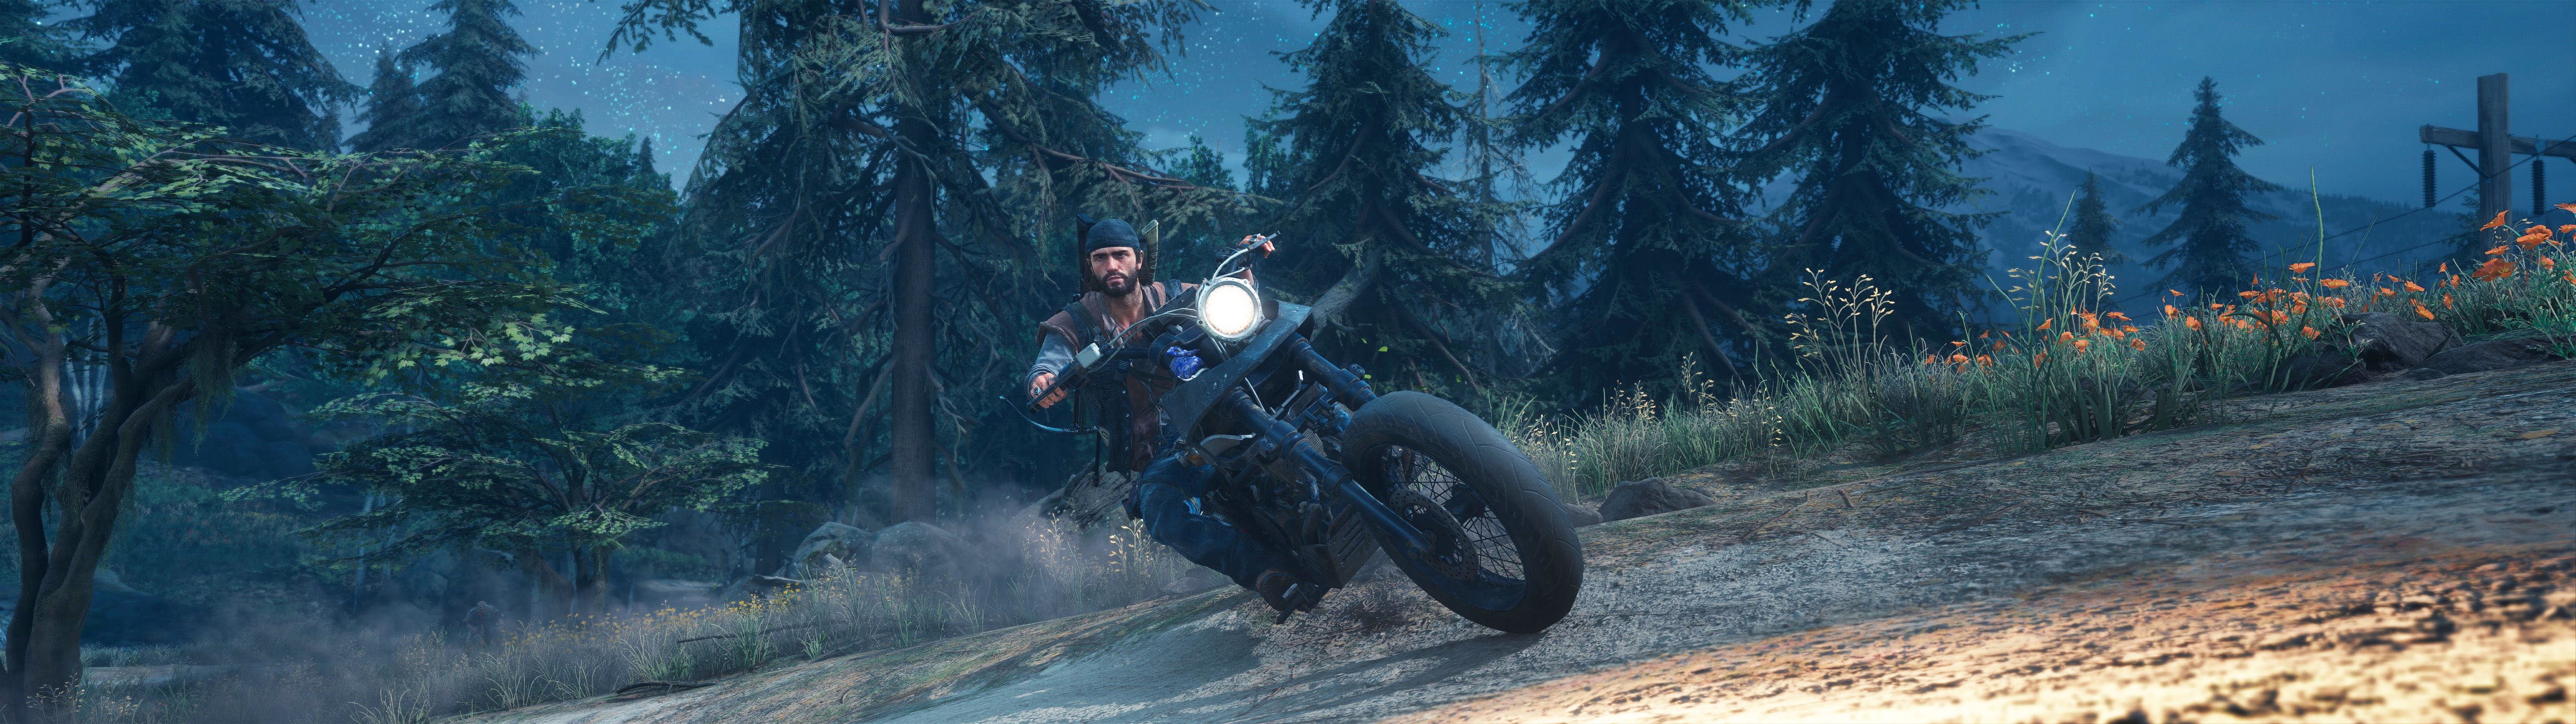 Deacon riding his motorbike in Days Gone